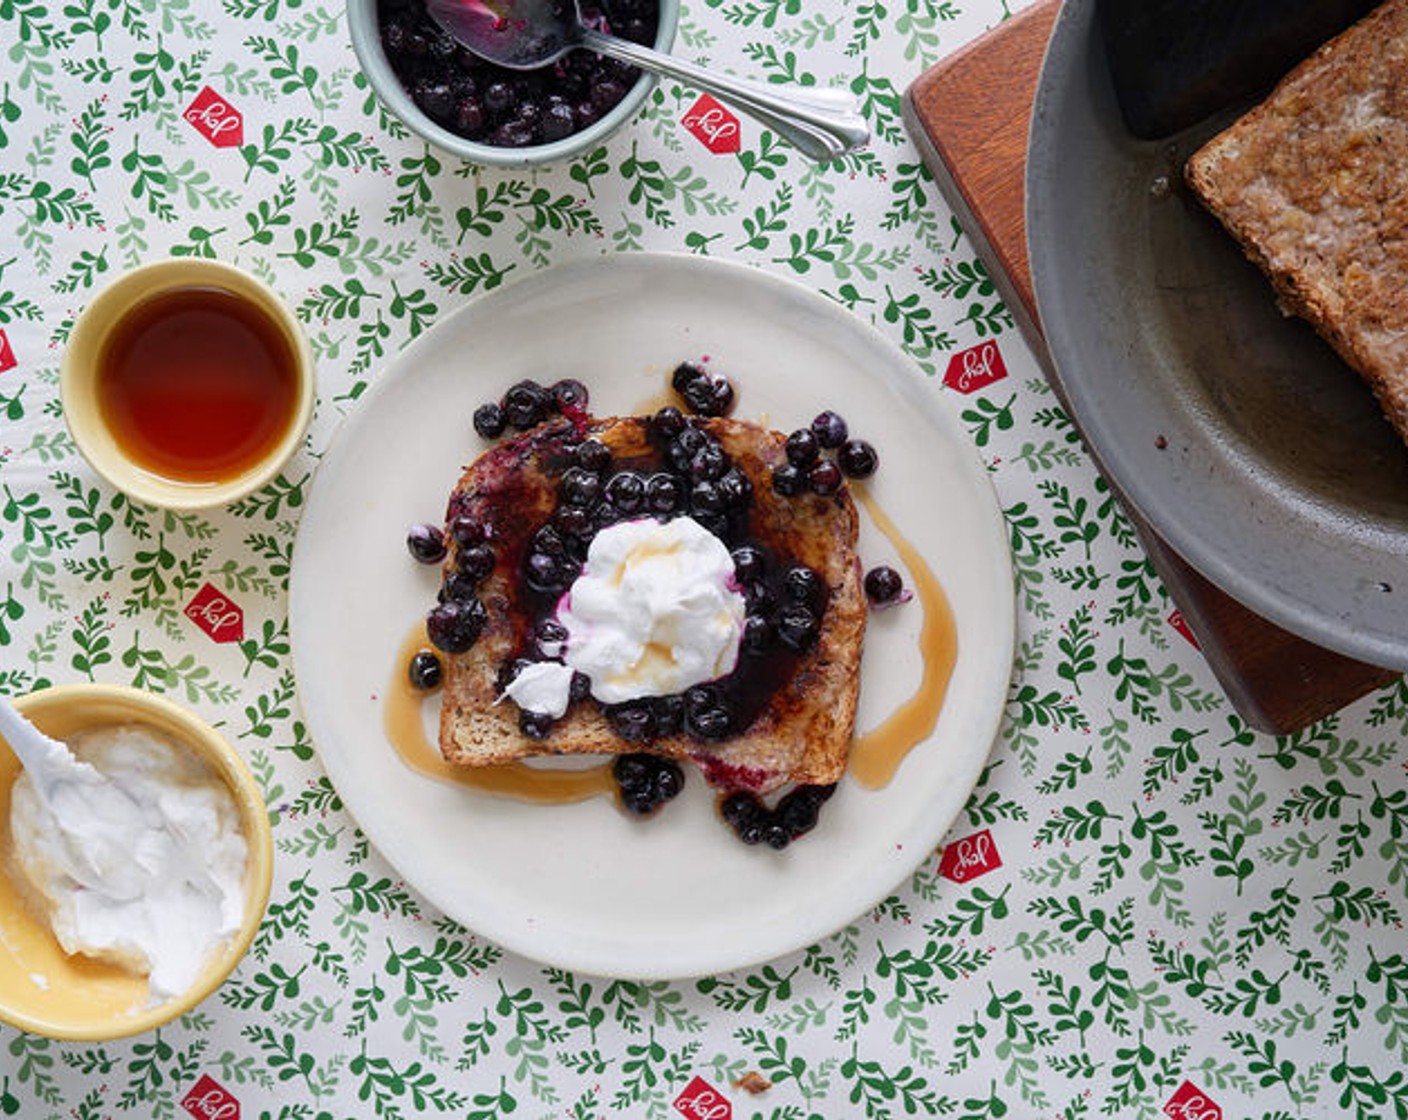 step 7 To serve, place 1-2 slices of French toast per person with a dollop of Yogurt (to taste), a spoonful of warmed wild blueberries, and a drizzle of Maple Syrup (to taste). Enjoy!